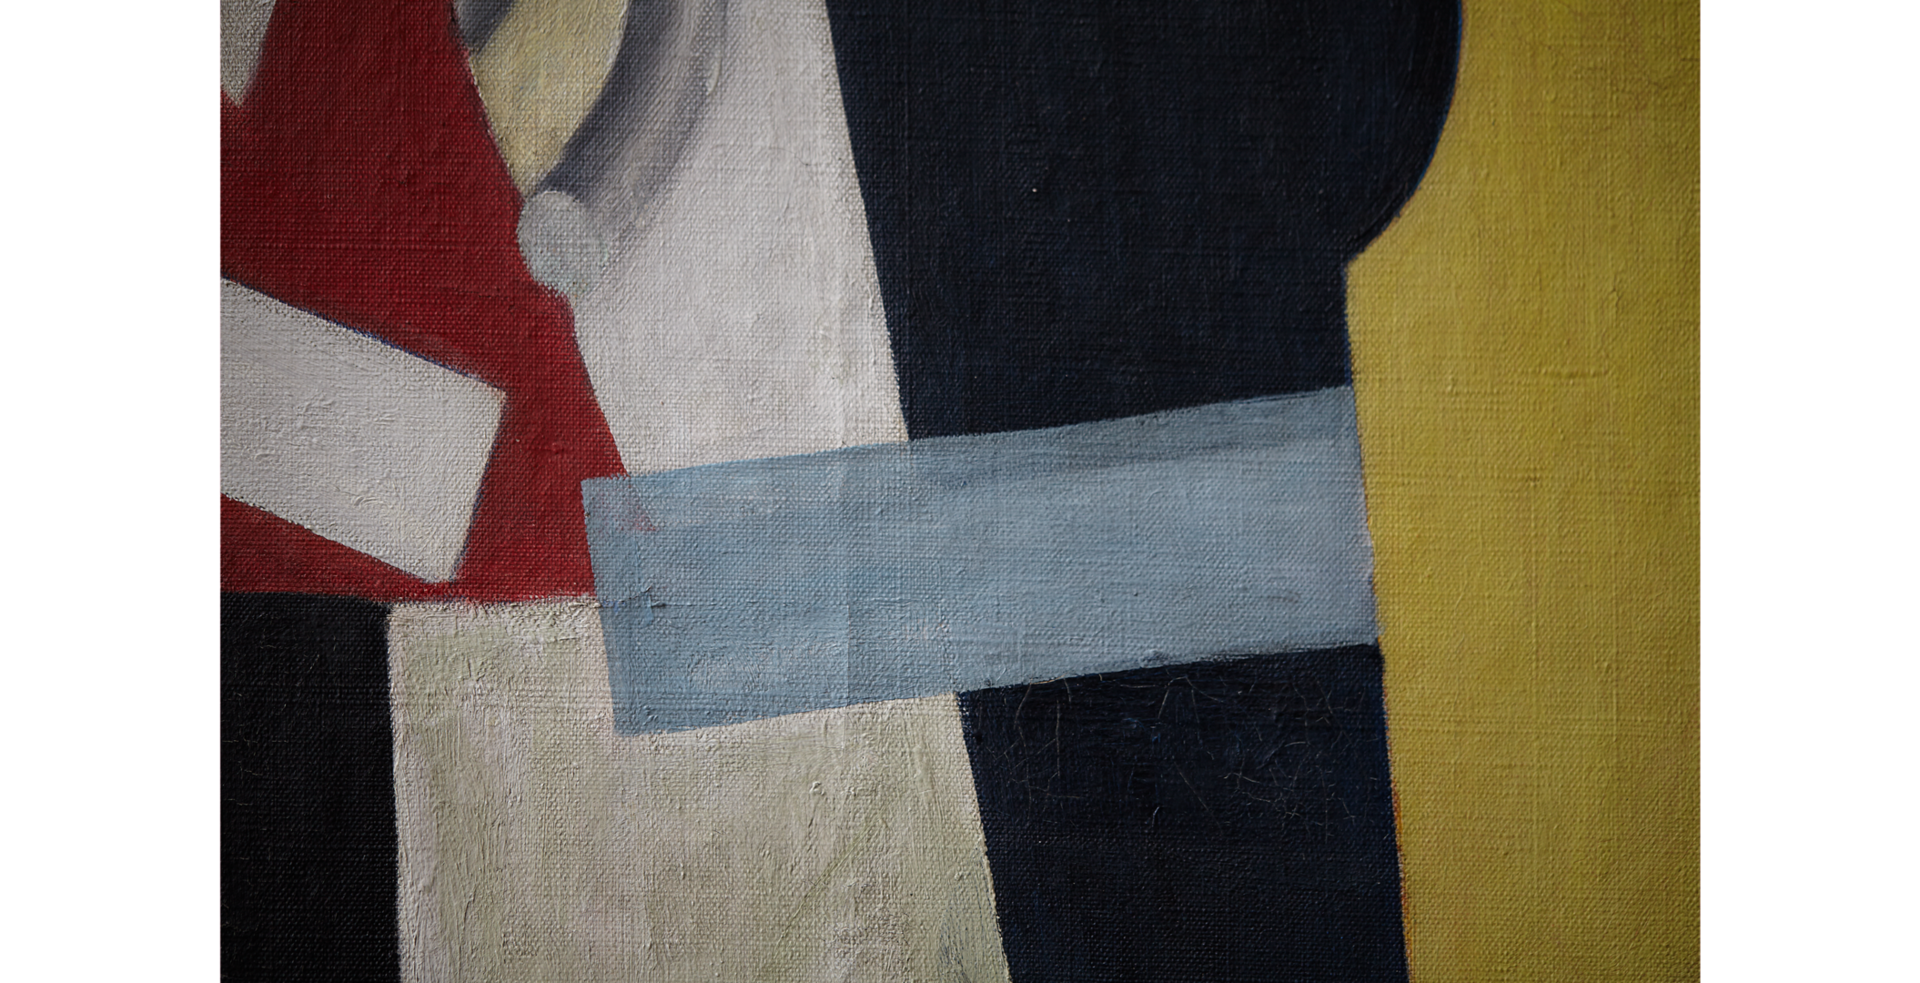 Detail of “Composition (The Typographer)” where a blue rectangle is more transparent than intended